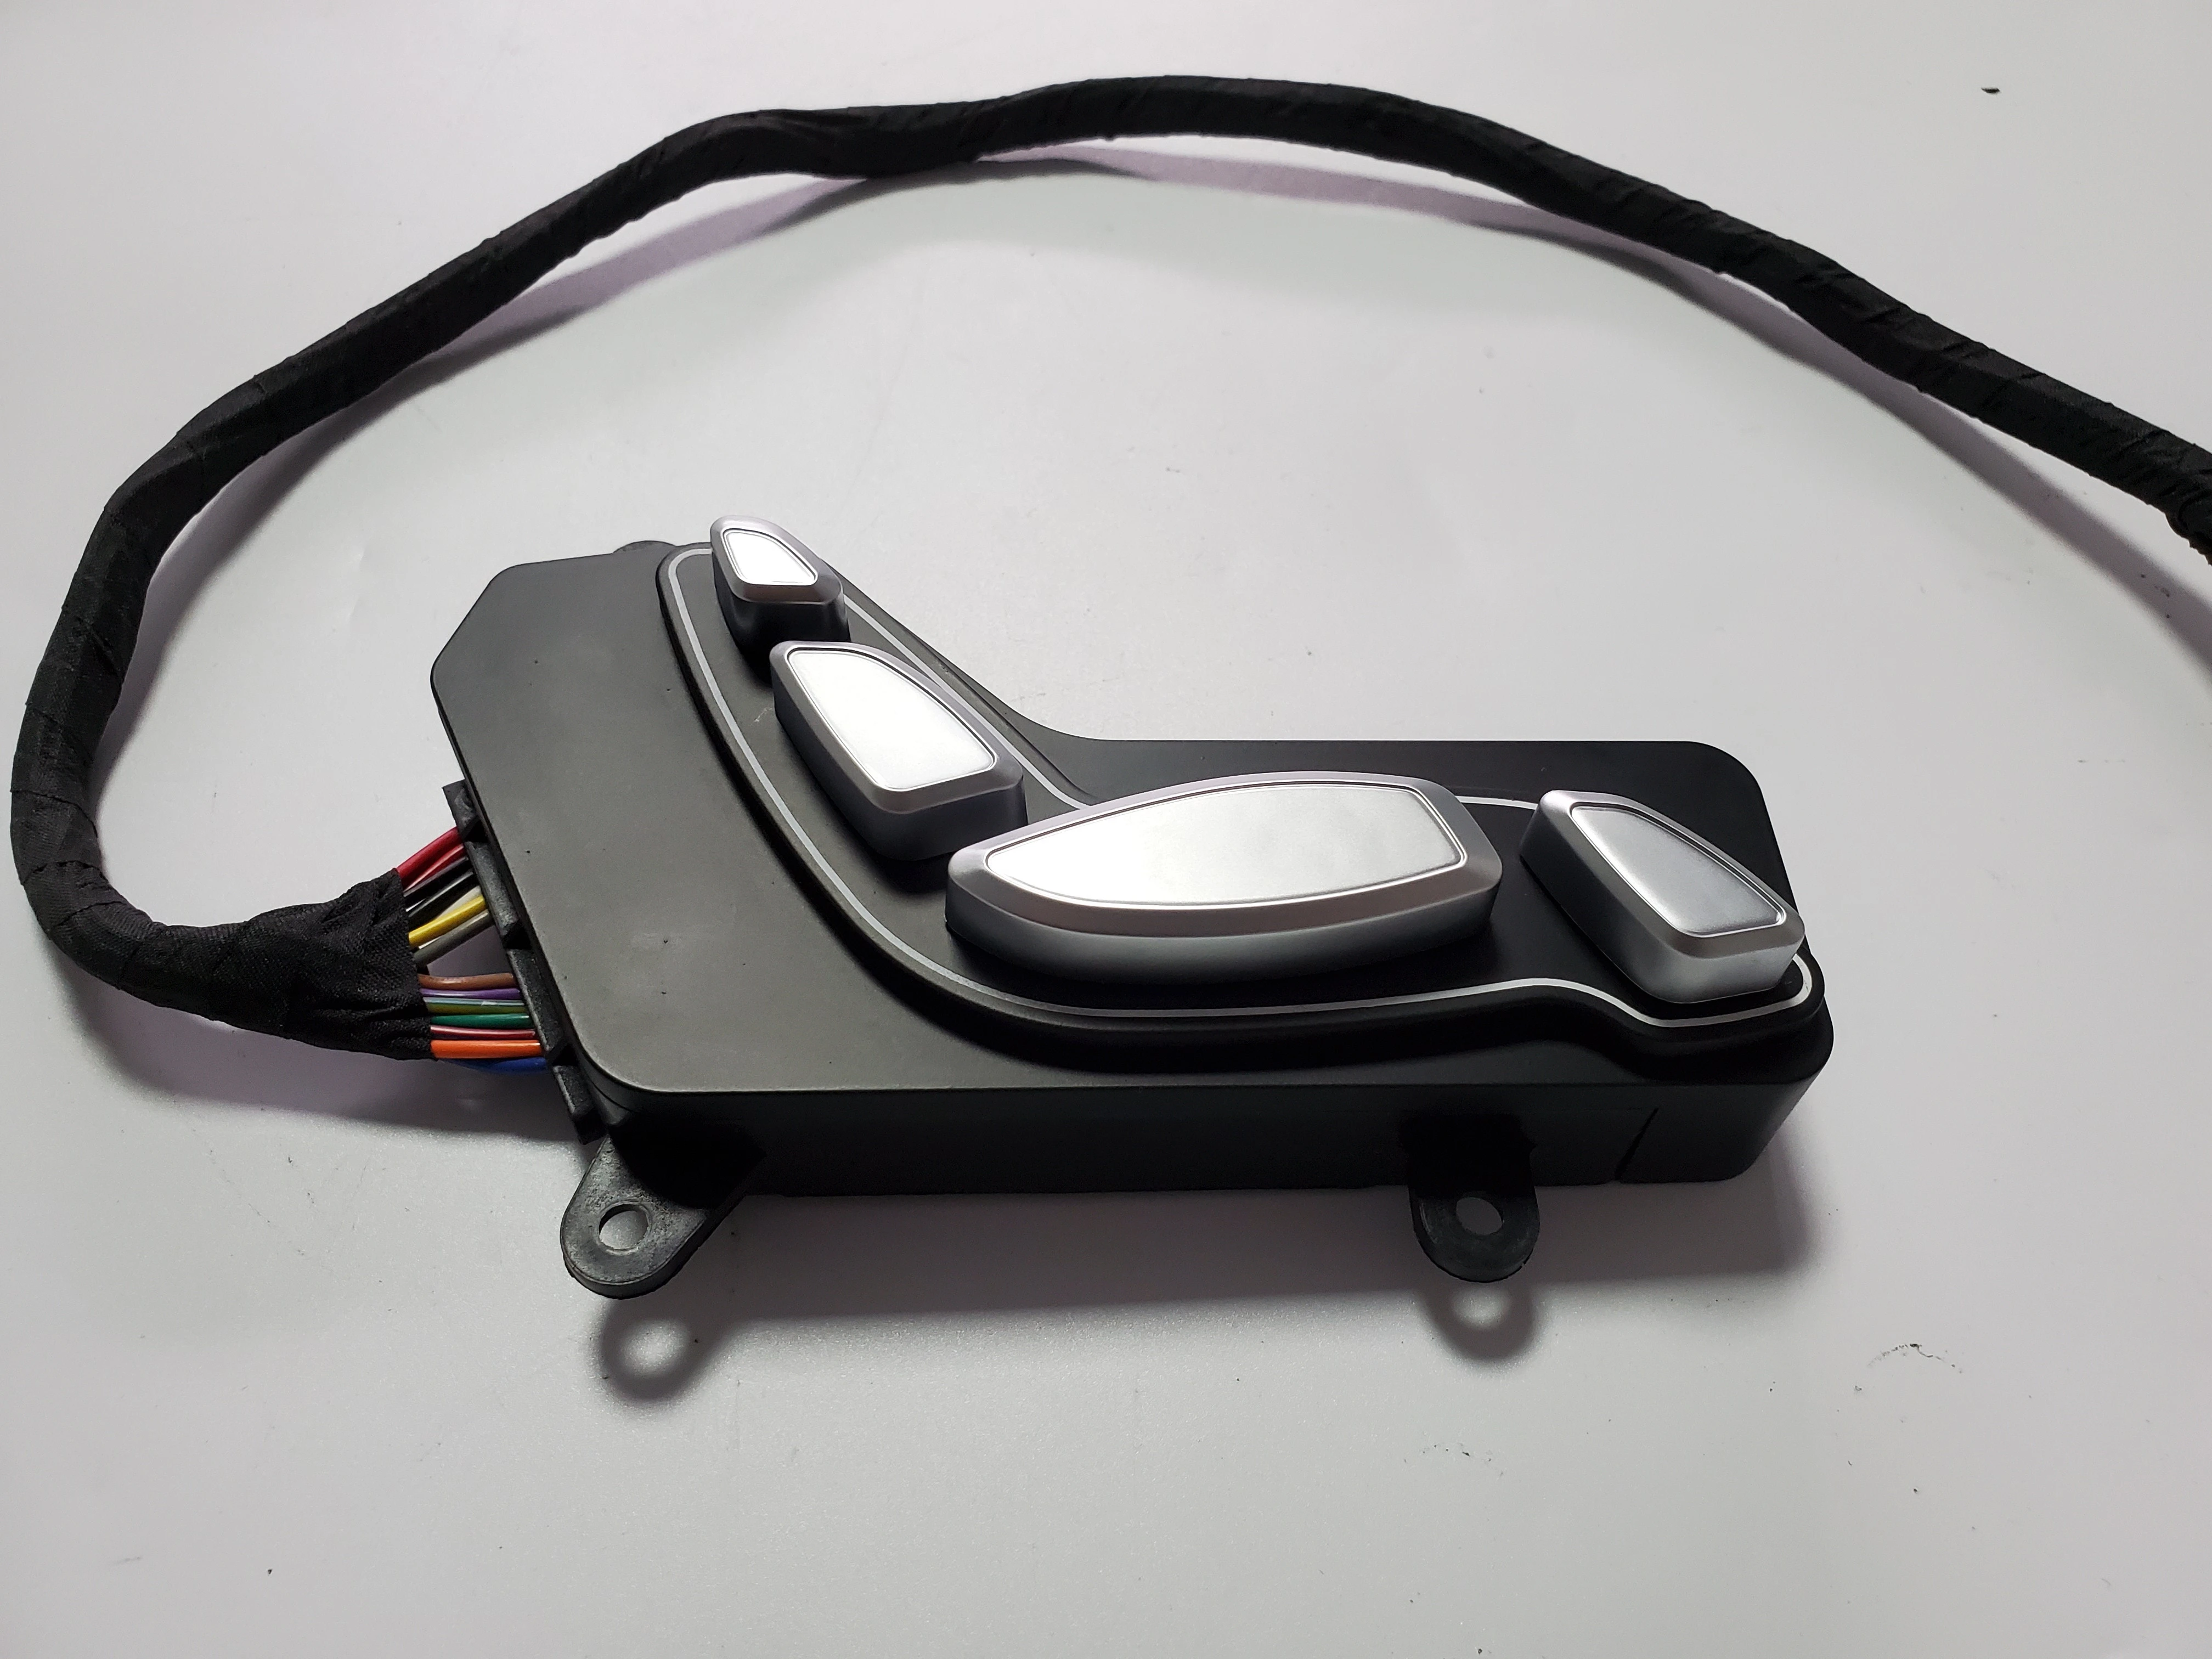 The seat adjustment switch is used to control the seat direction of the luxury seat